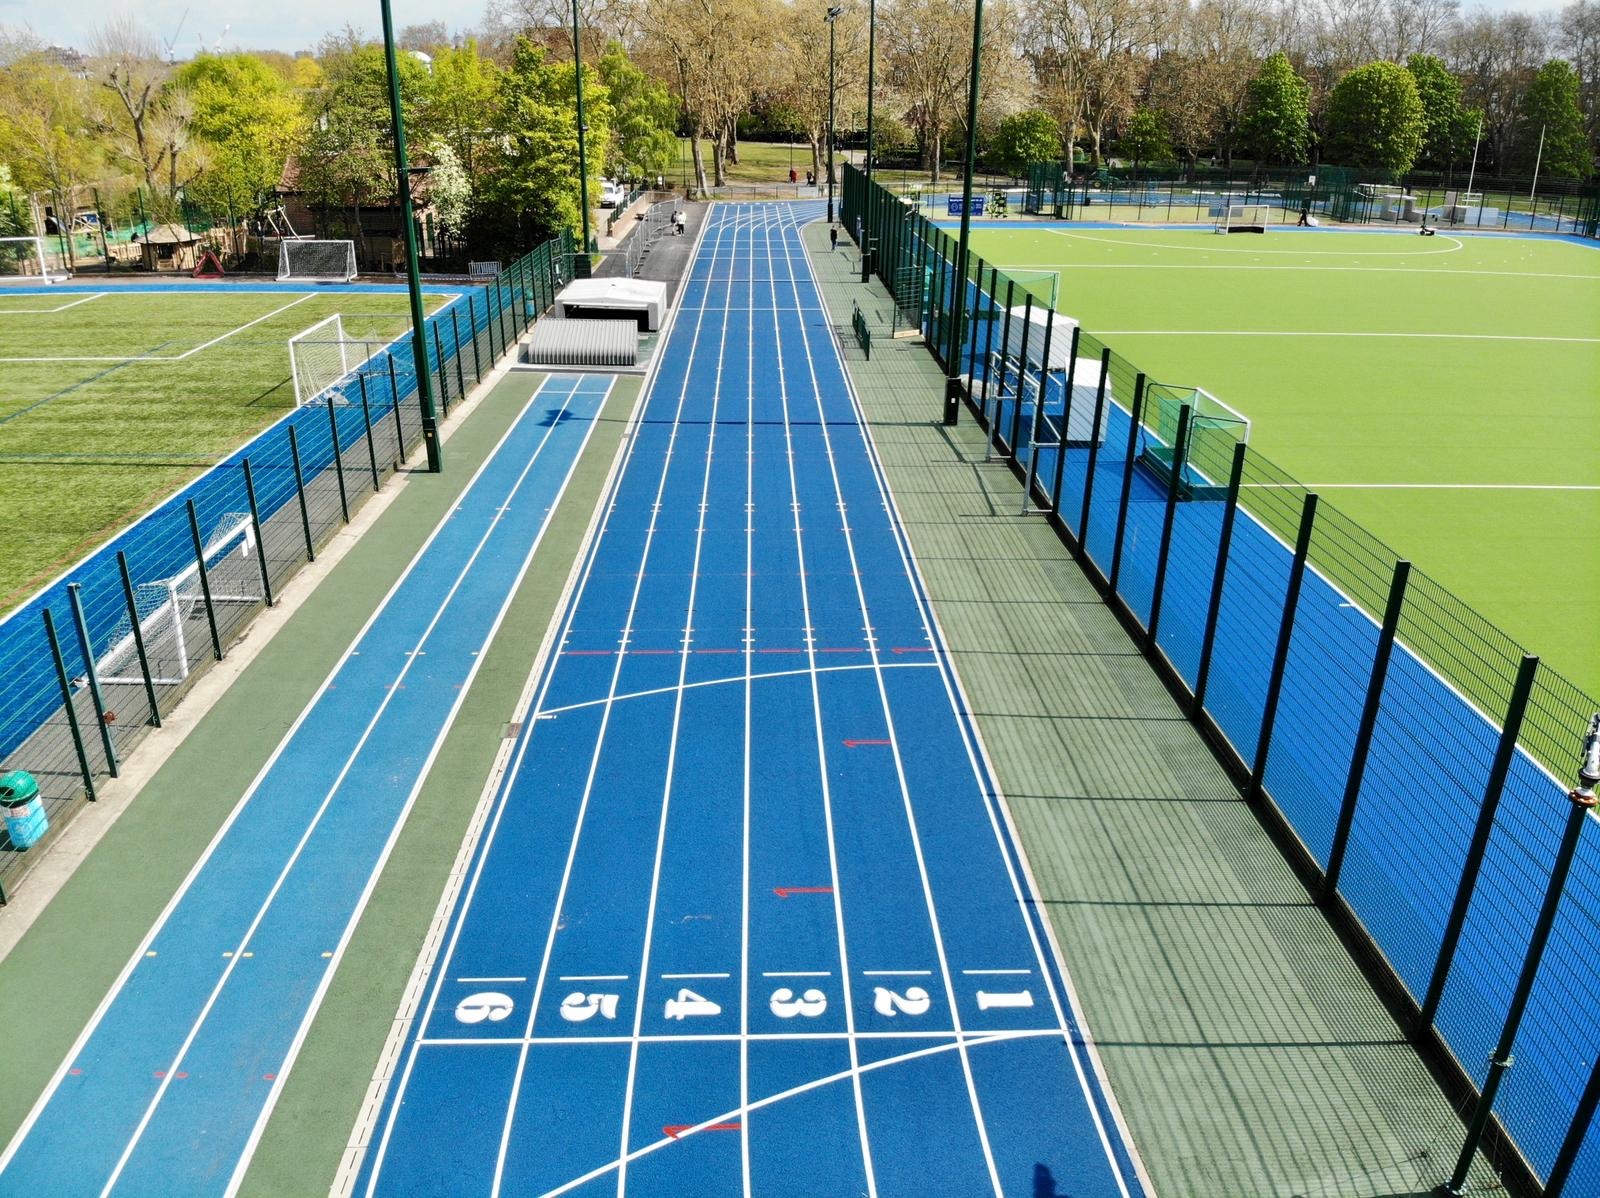 The polymeric surface at Paddington Recreation Ground was finished in a striking Westminster City Council blue.